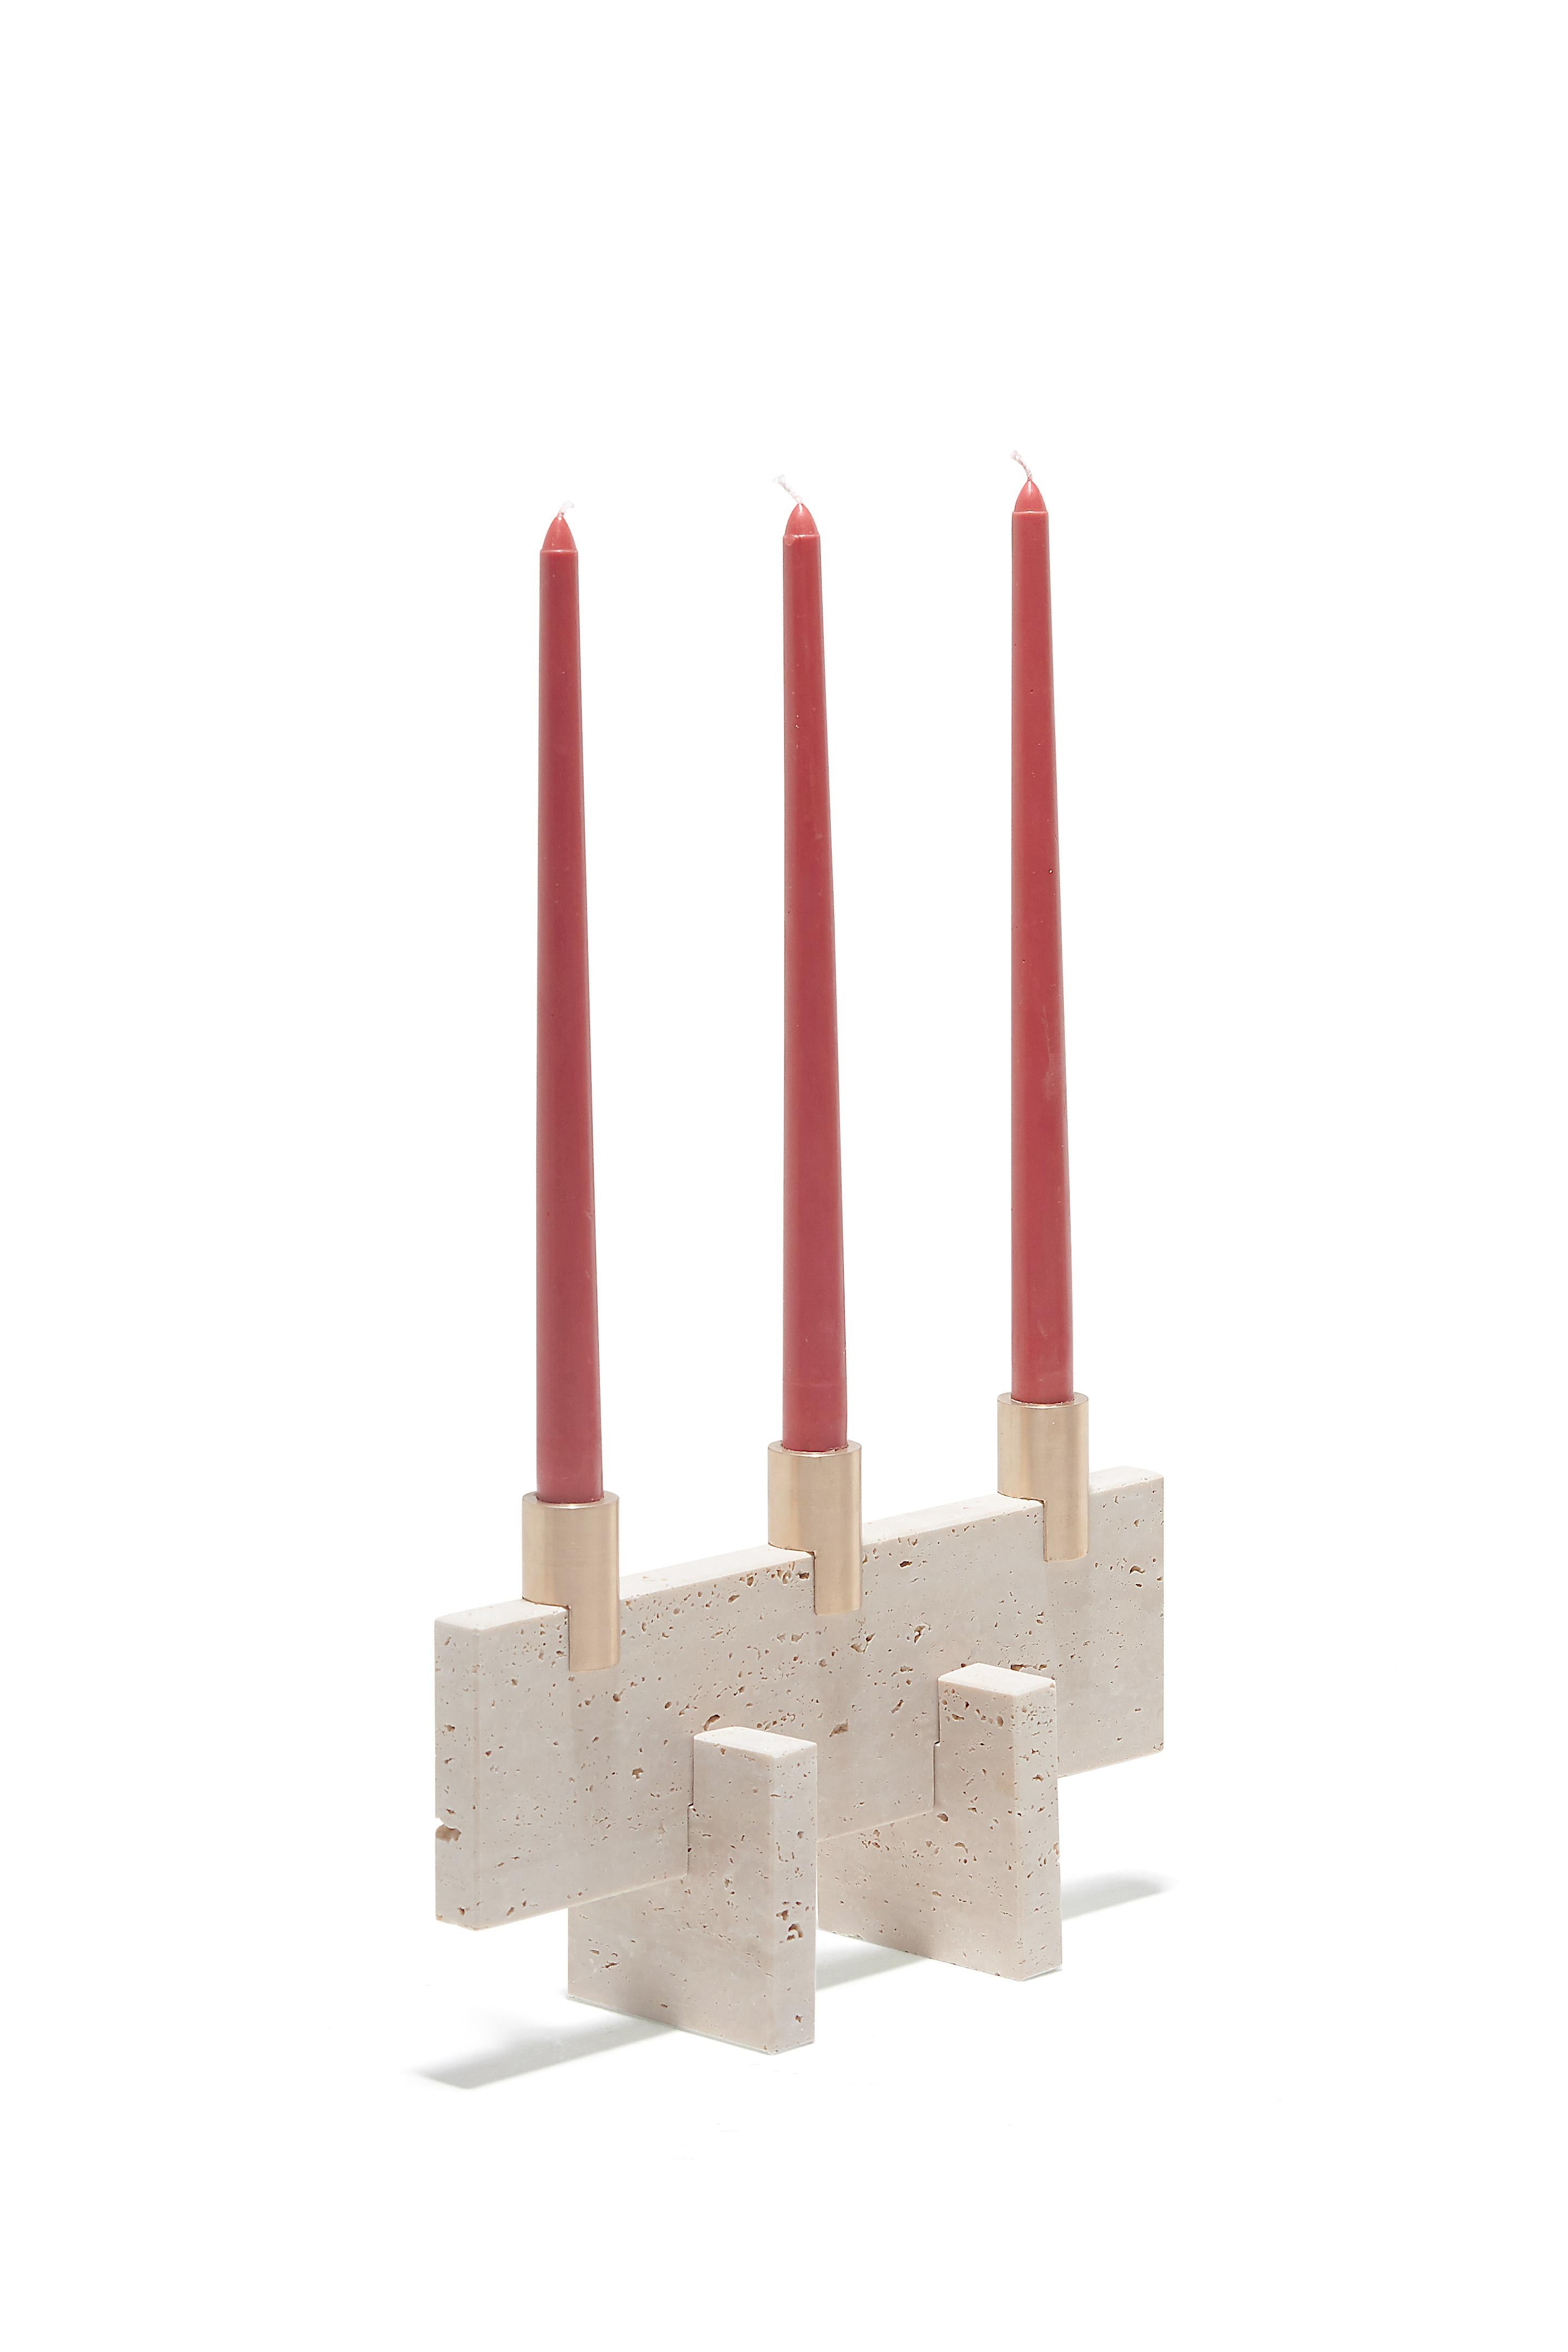 The Fit Candle Three is a minimalist style candle holder made of treated Travertine marble. This candle holder is composed by three marble pieces and three solid brass pieces, all of them assembled in a logical and harmonious way.
Josep Vila